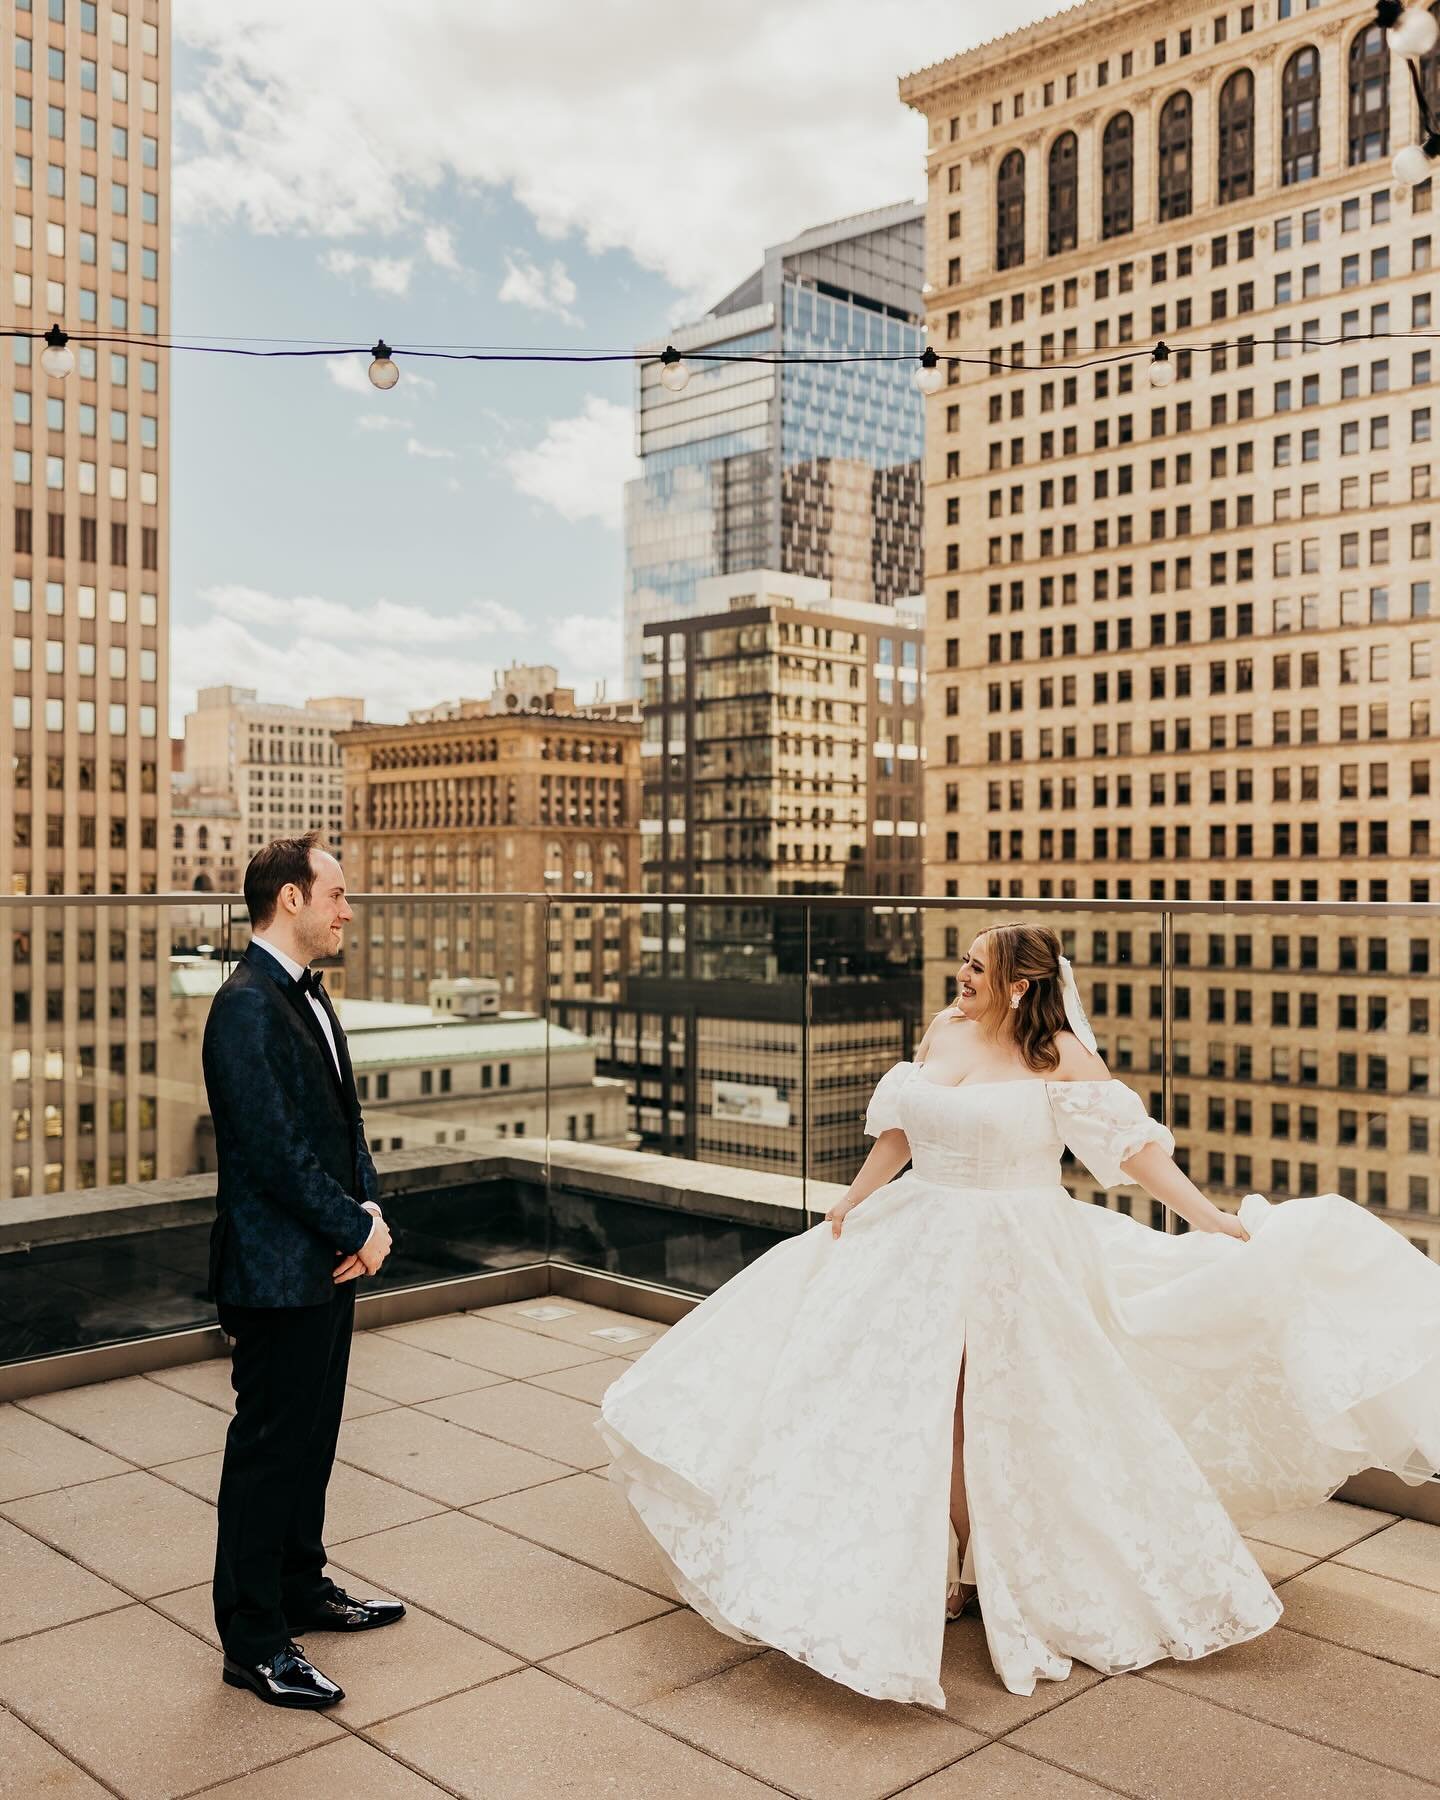 Endless laughs, unforgettable memories, best friends and the time of their lives&hellip;.and mine! Love these two! 
.
.
#tylernormanphotography #burghbrides #pittsburgh #pittsburghwedding #pittsburghweddingphotographer #pittsburghweddingphotography #